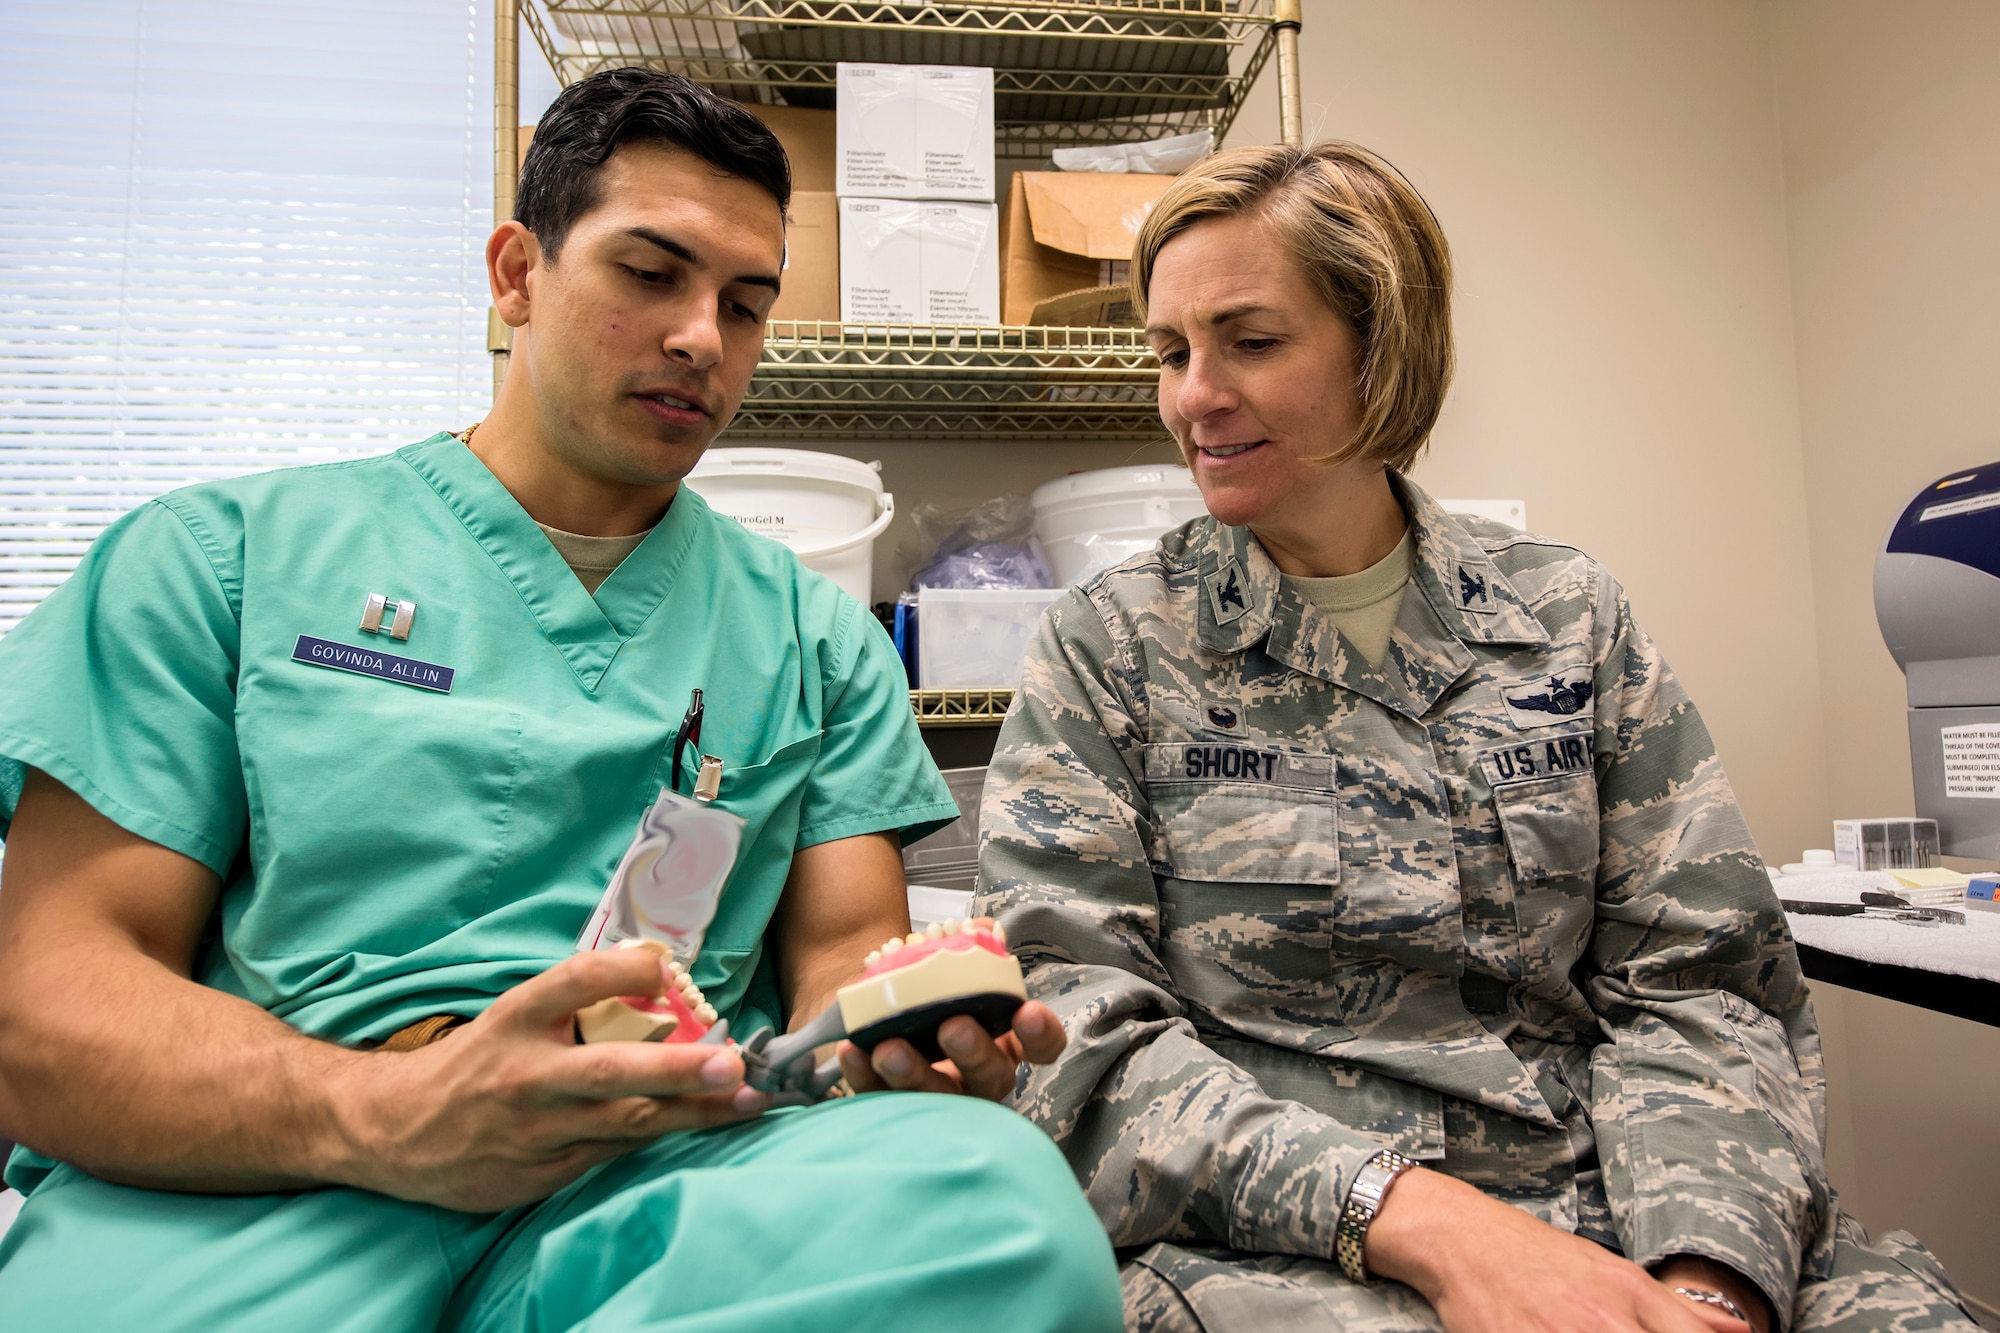 Col. Jennifer Short, right, 23d Wing commander, and Capt. Dr. Govinda Allin, 23d Aerospace Medicine Squadron dentist, inspect a jaw model, April 30, 2018, at Moody Air Force Base, Ga. Short toured the 23d Medical Group (MDG) to gain a better understanding of their overall mission, capabilities, and comprehensive duties, and was able to experience the day-to-day operations of the various units within the 23d MDG, ranging from bioenvironmental to ambulatory care. (U.S. Air Force photo by Airman 1st Class Eugene Oliver)